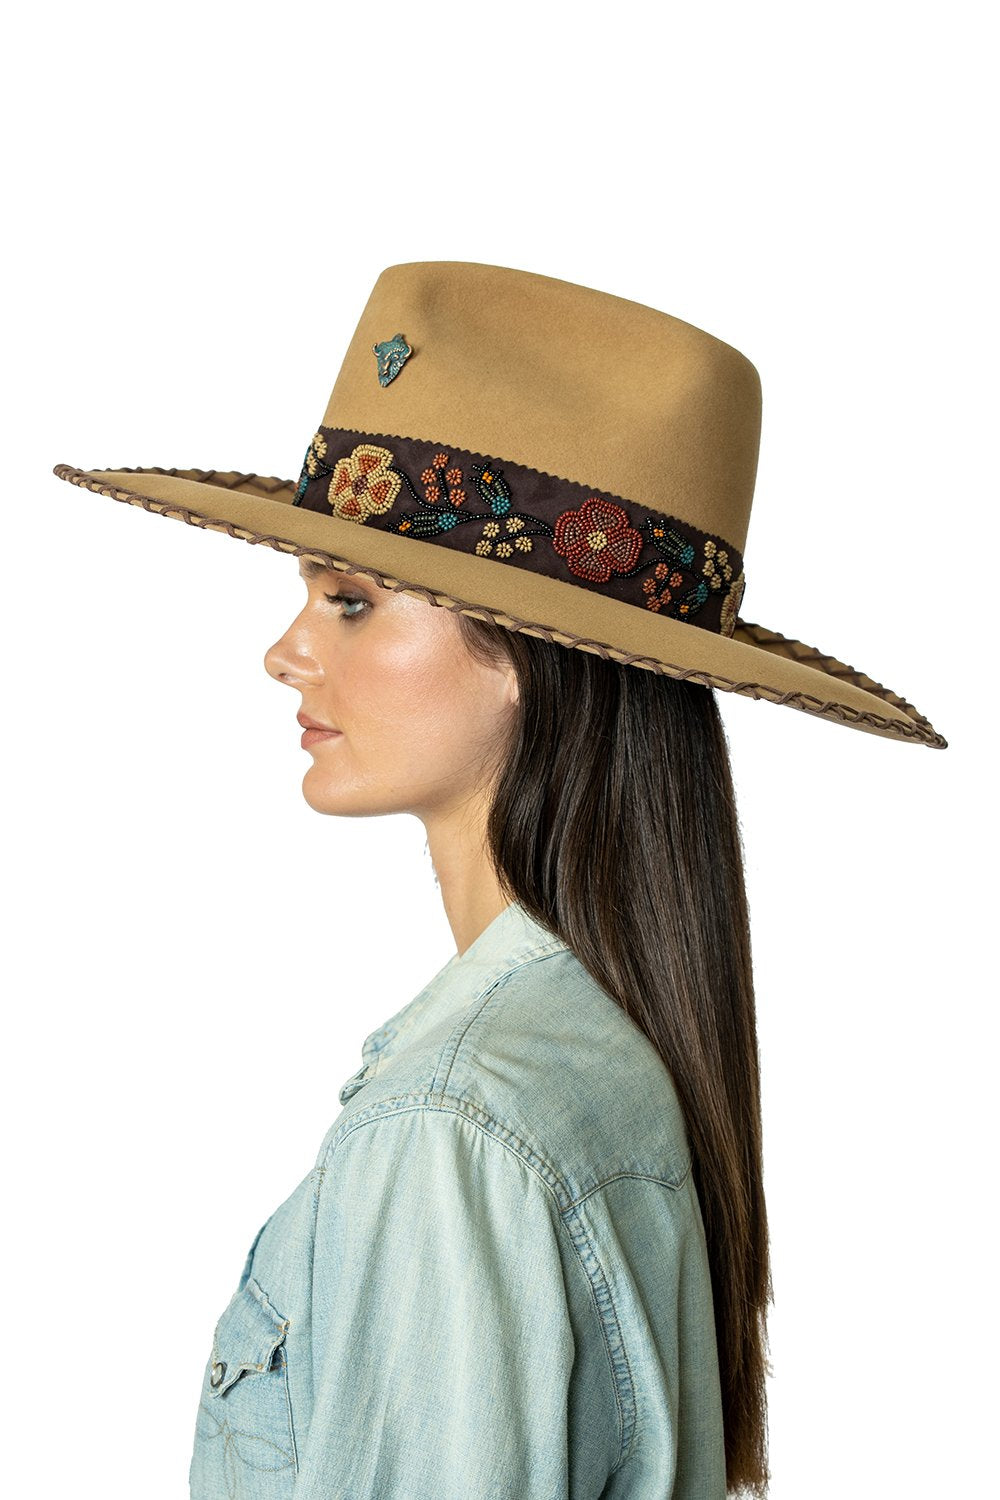 DDR Felt Showman Hat in French tan FA794 Fall Cody Collection at 6Whiskey six whisky